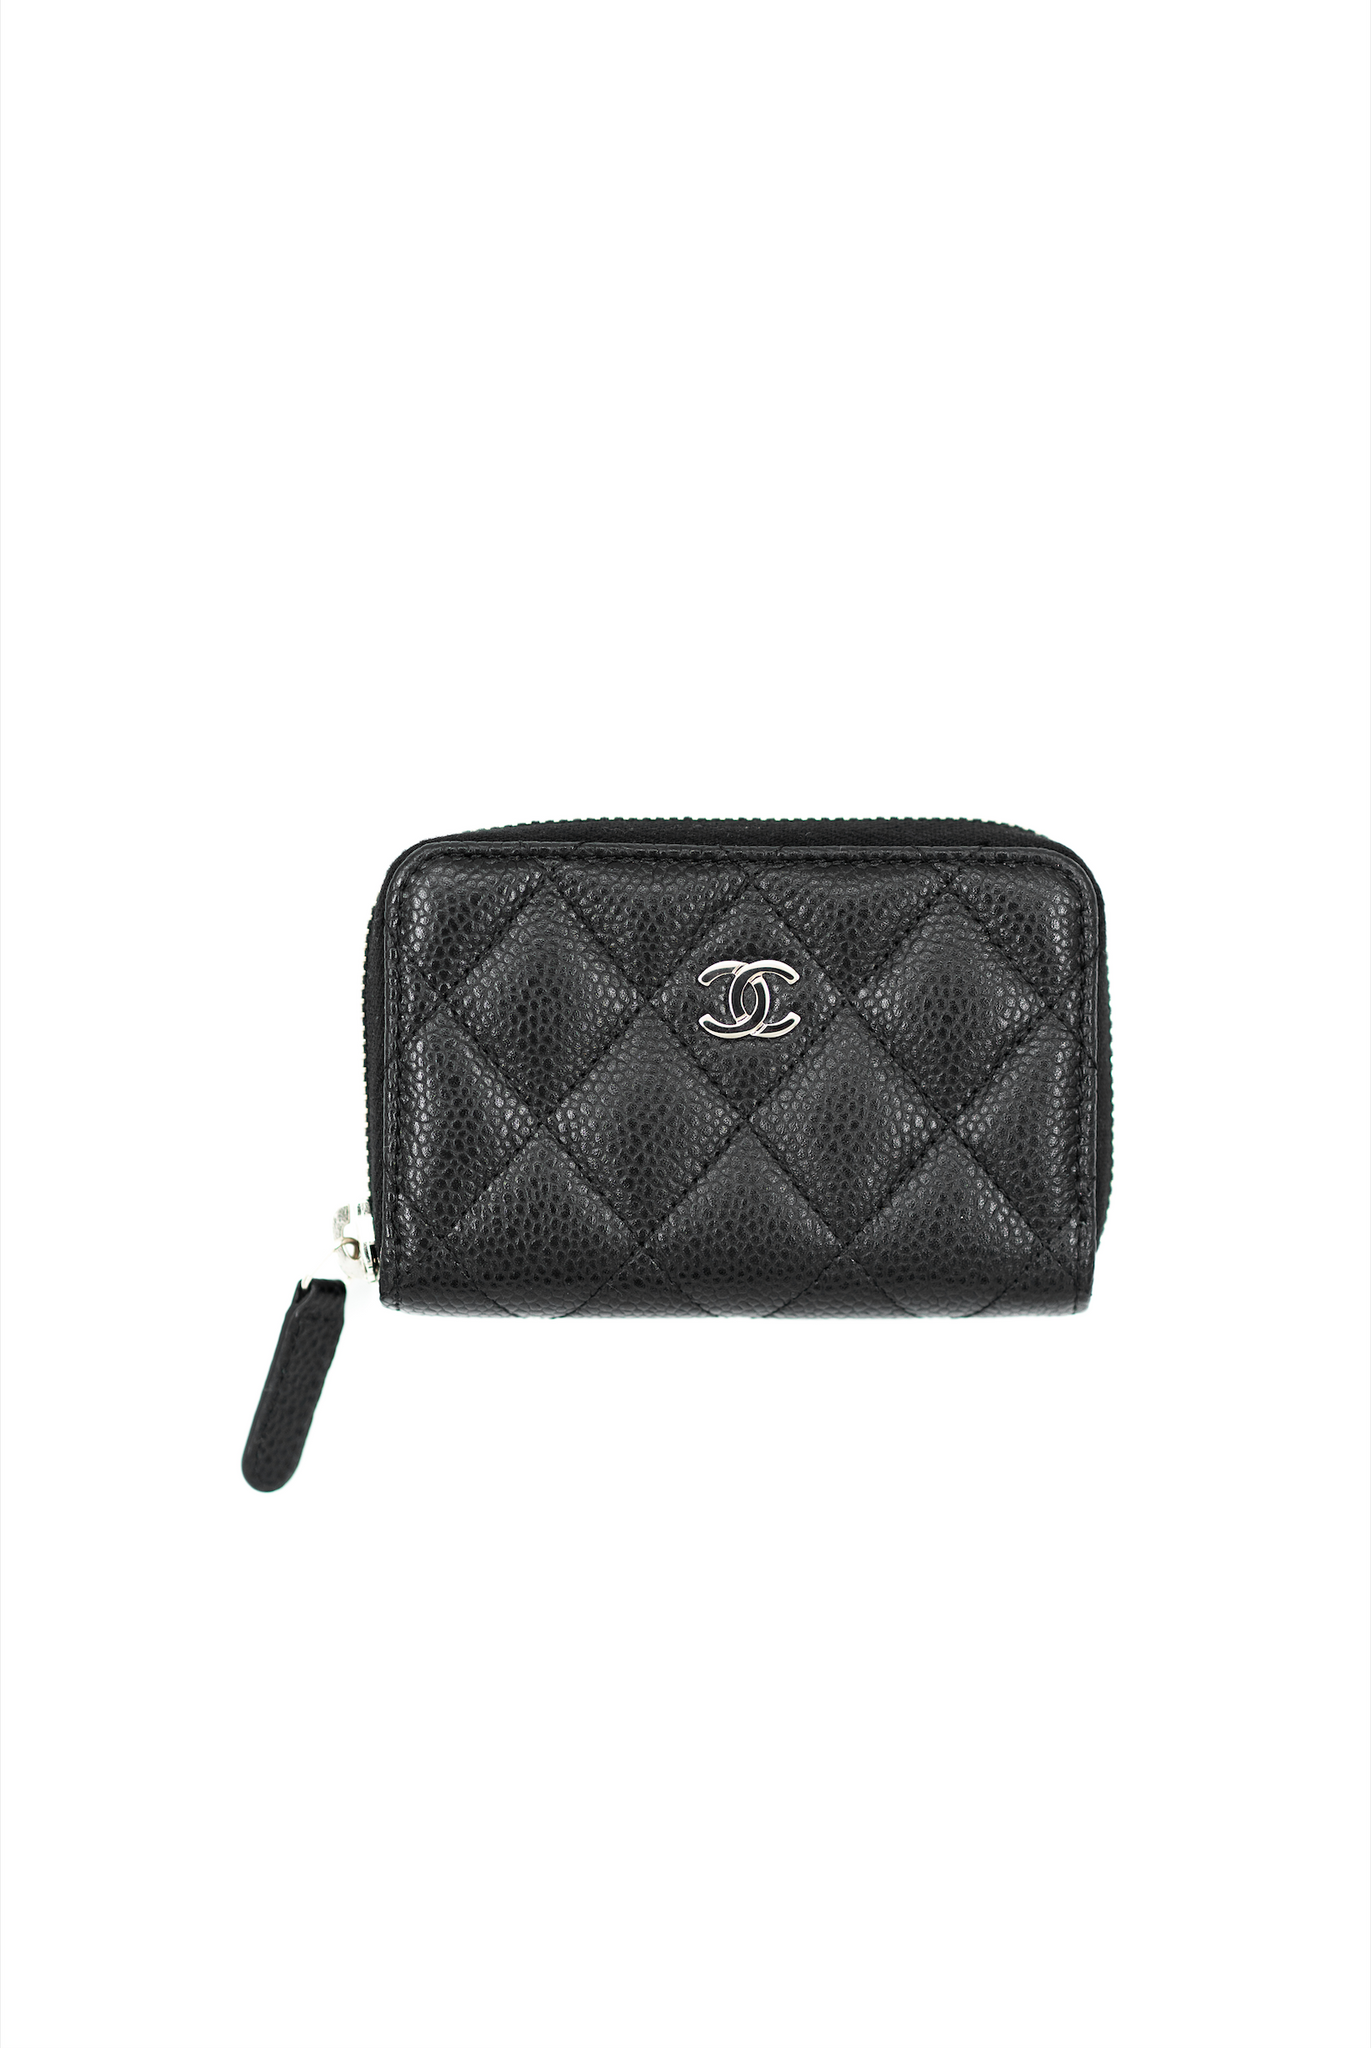 Check Out 70 Chanel Spring 2018 Wallets iPad Cases WOCs and Accessories  and Prices in Boutiques Now  PurseBlog